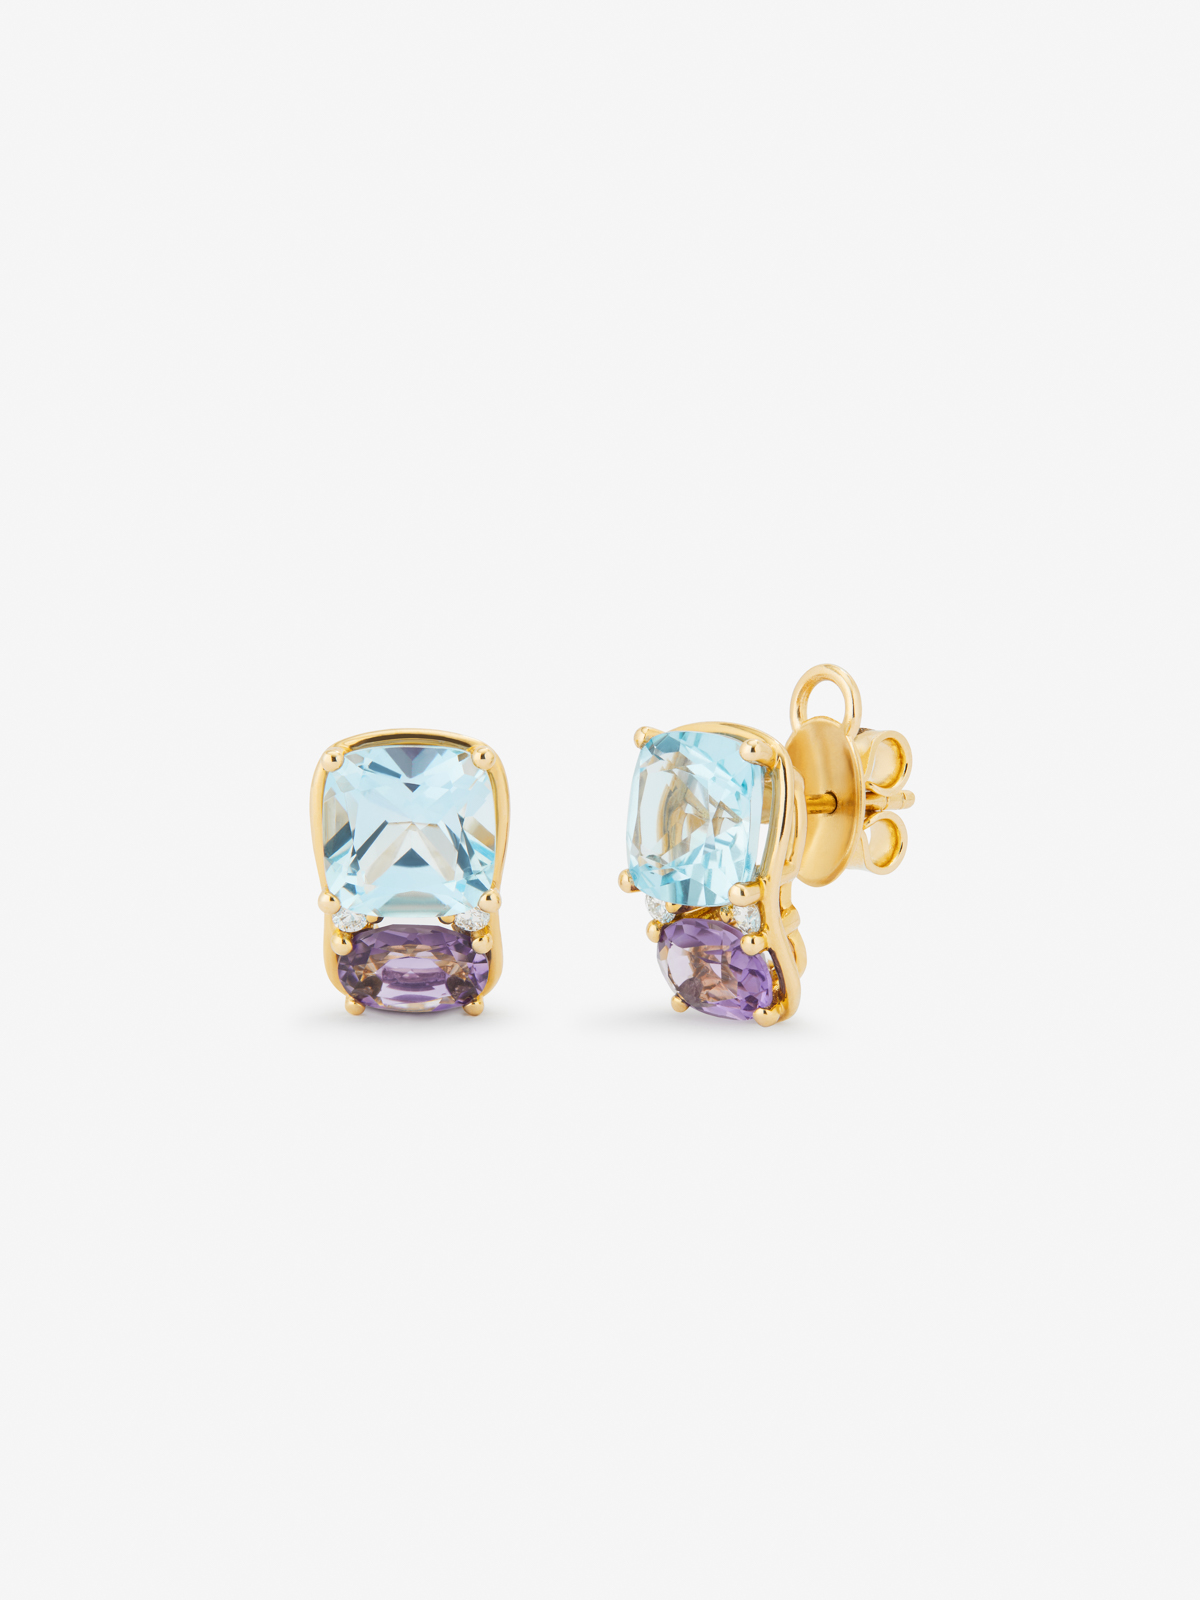 18kt yellow gold earrings with Sky Topacios and purple amethysts